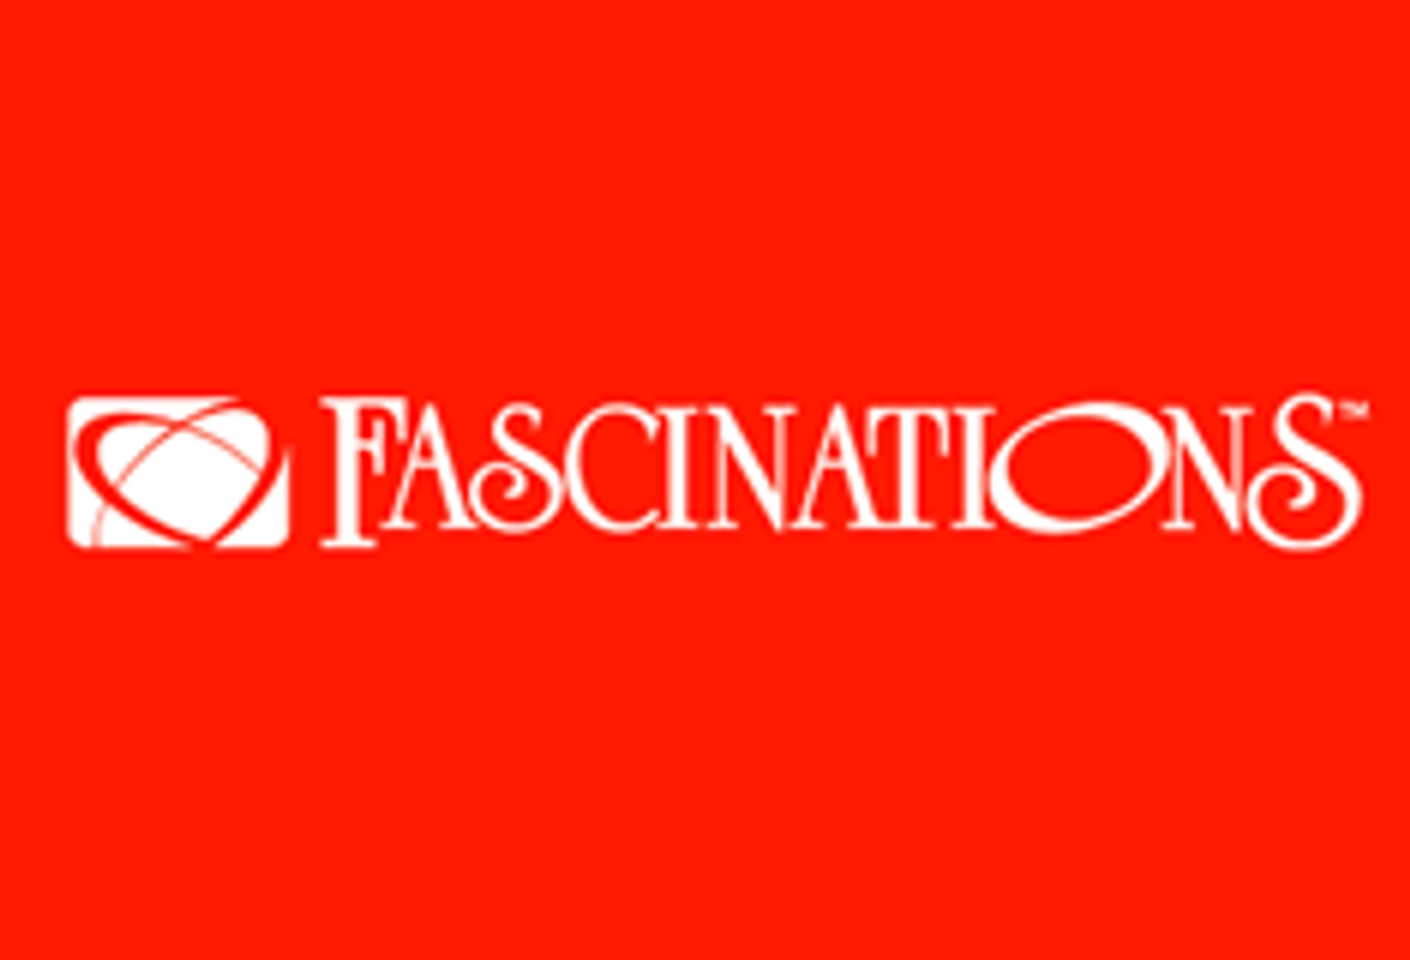 Fascinations Raises Funds for Cystic Fibrosis Foundation